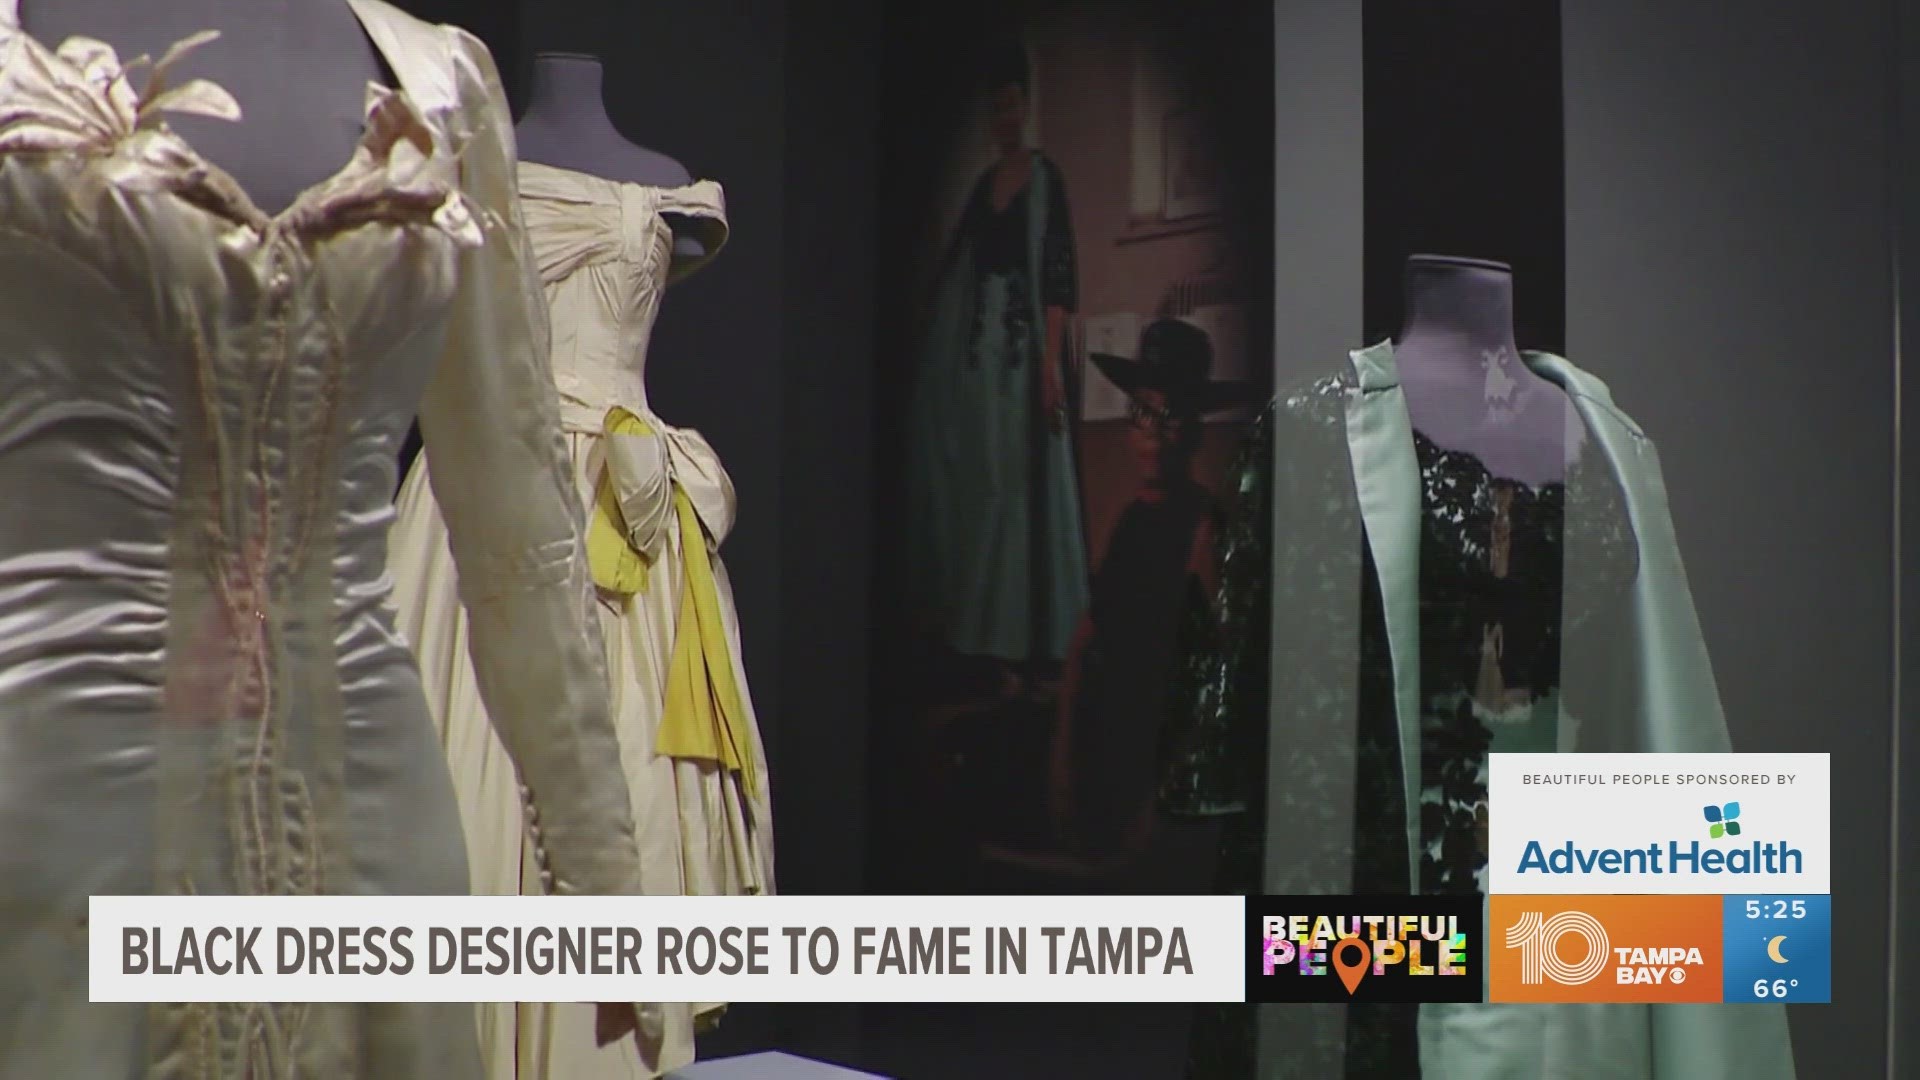 Ann Lowe got her start in Tampa designing Gasparilla gowns, before creating one of the most talked about wedding dresses in America.